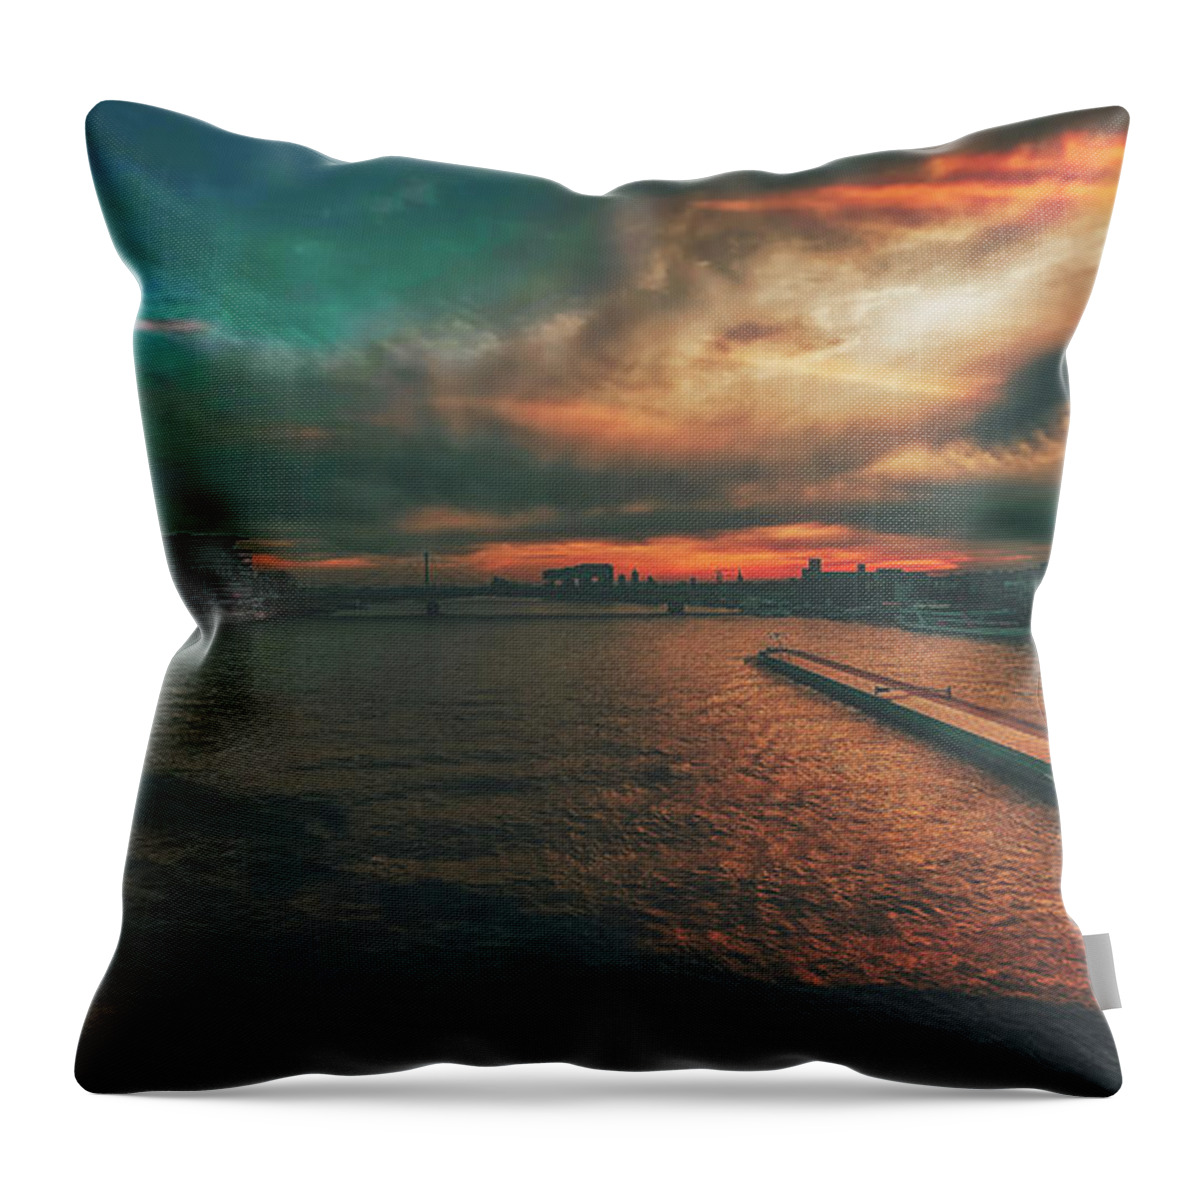 Rhine Throw Pillow featuring the photograph The Rhine At Dusk - Cologne #1 by Mountain Dreams